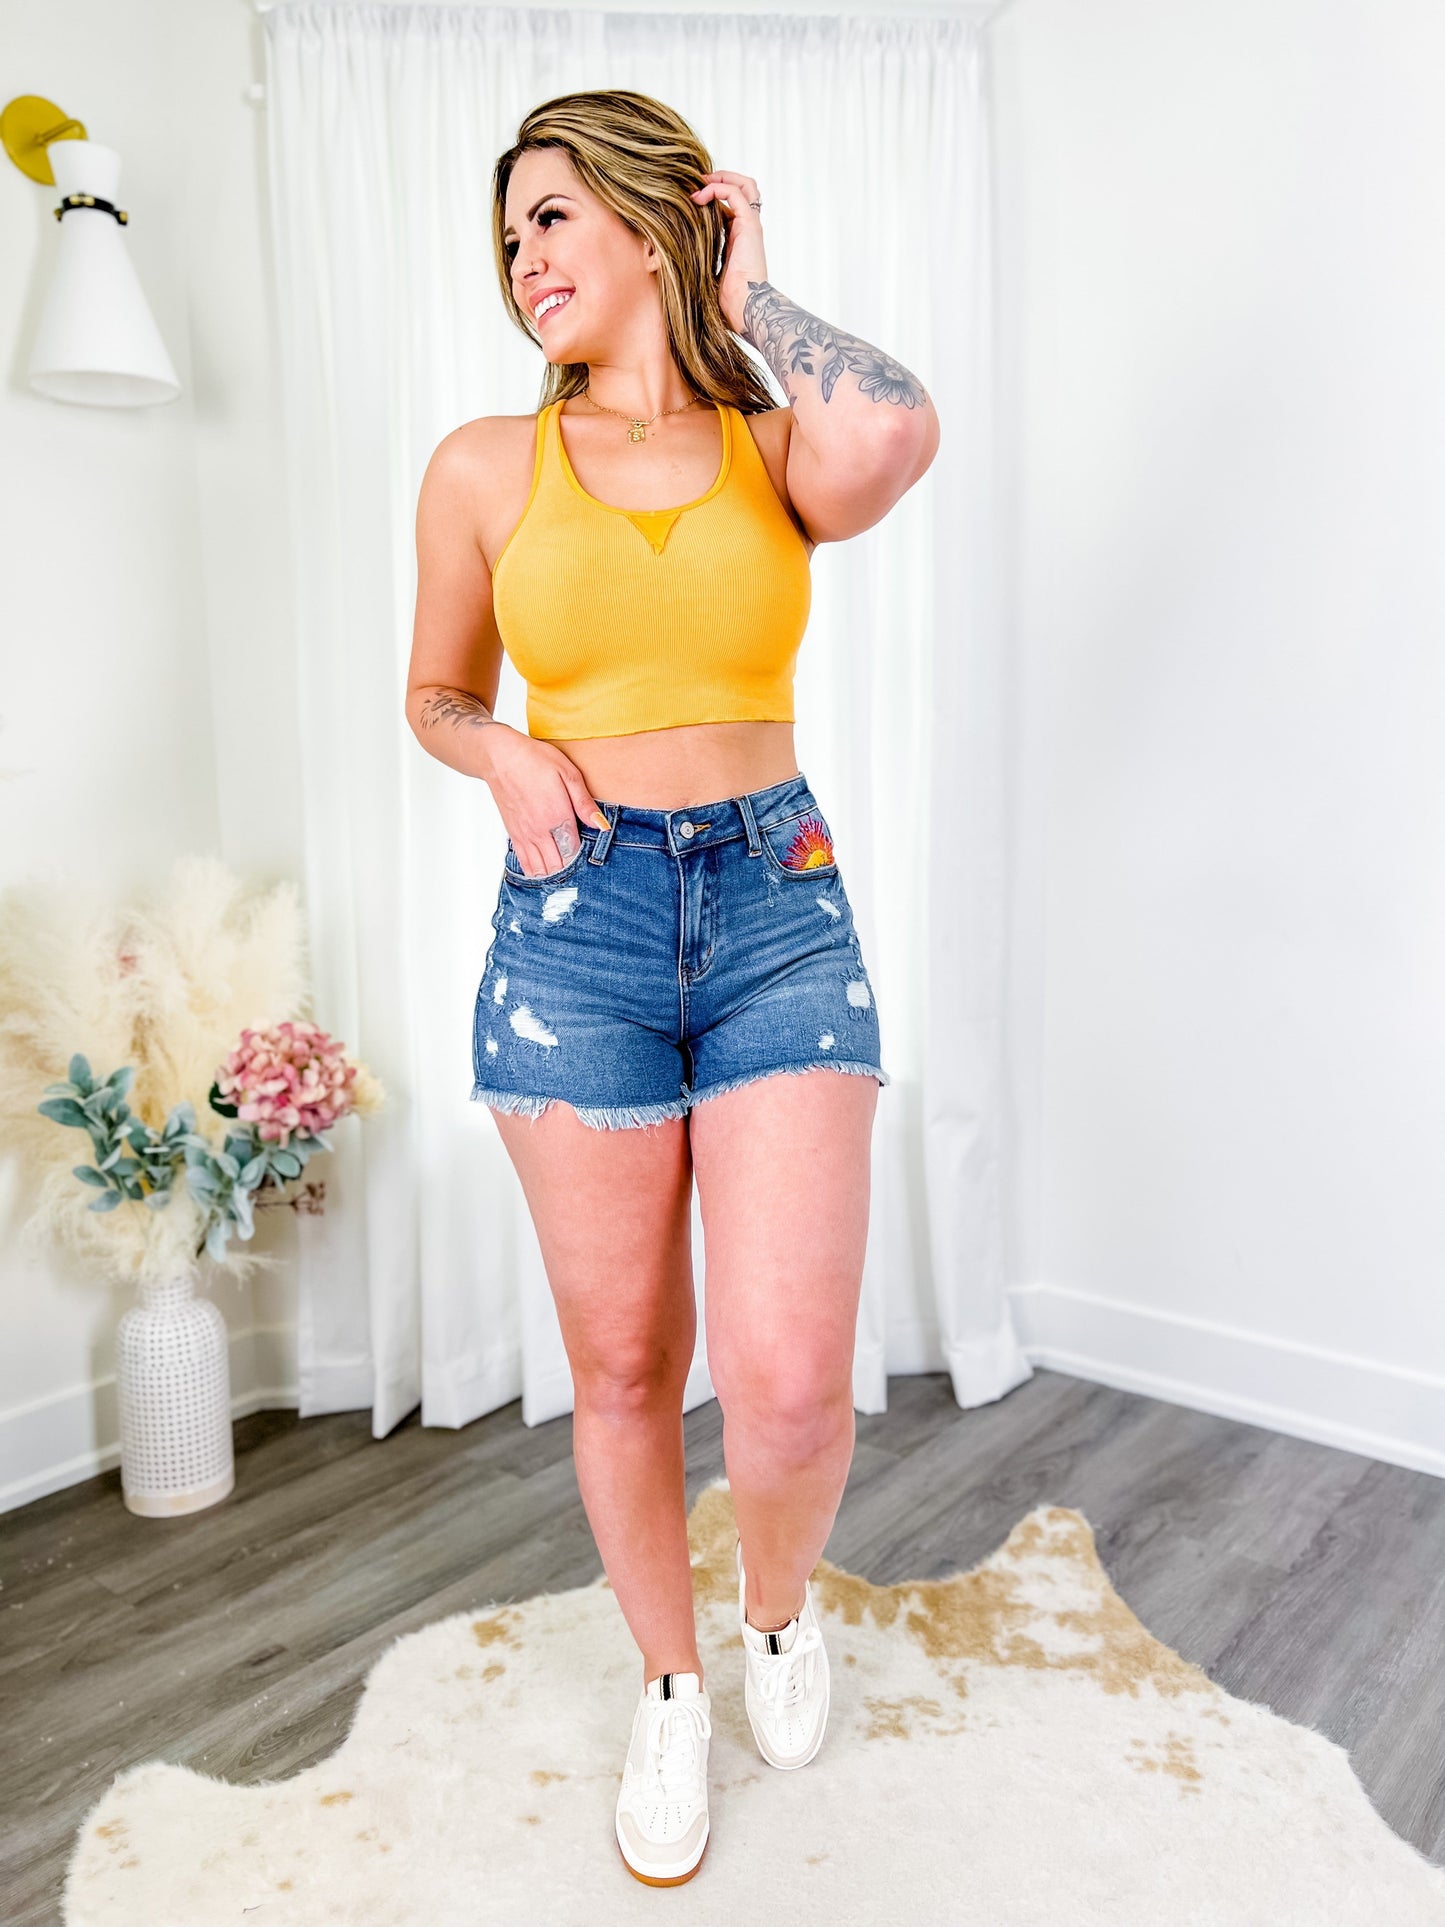 Judy Blue "Here Comes the Sun" Embroidered Cut Off Shorts